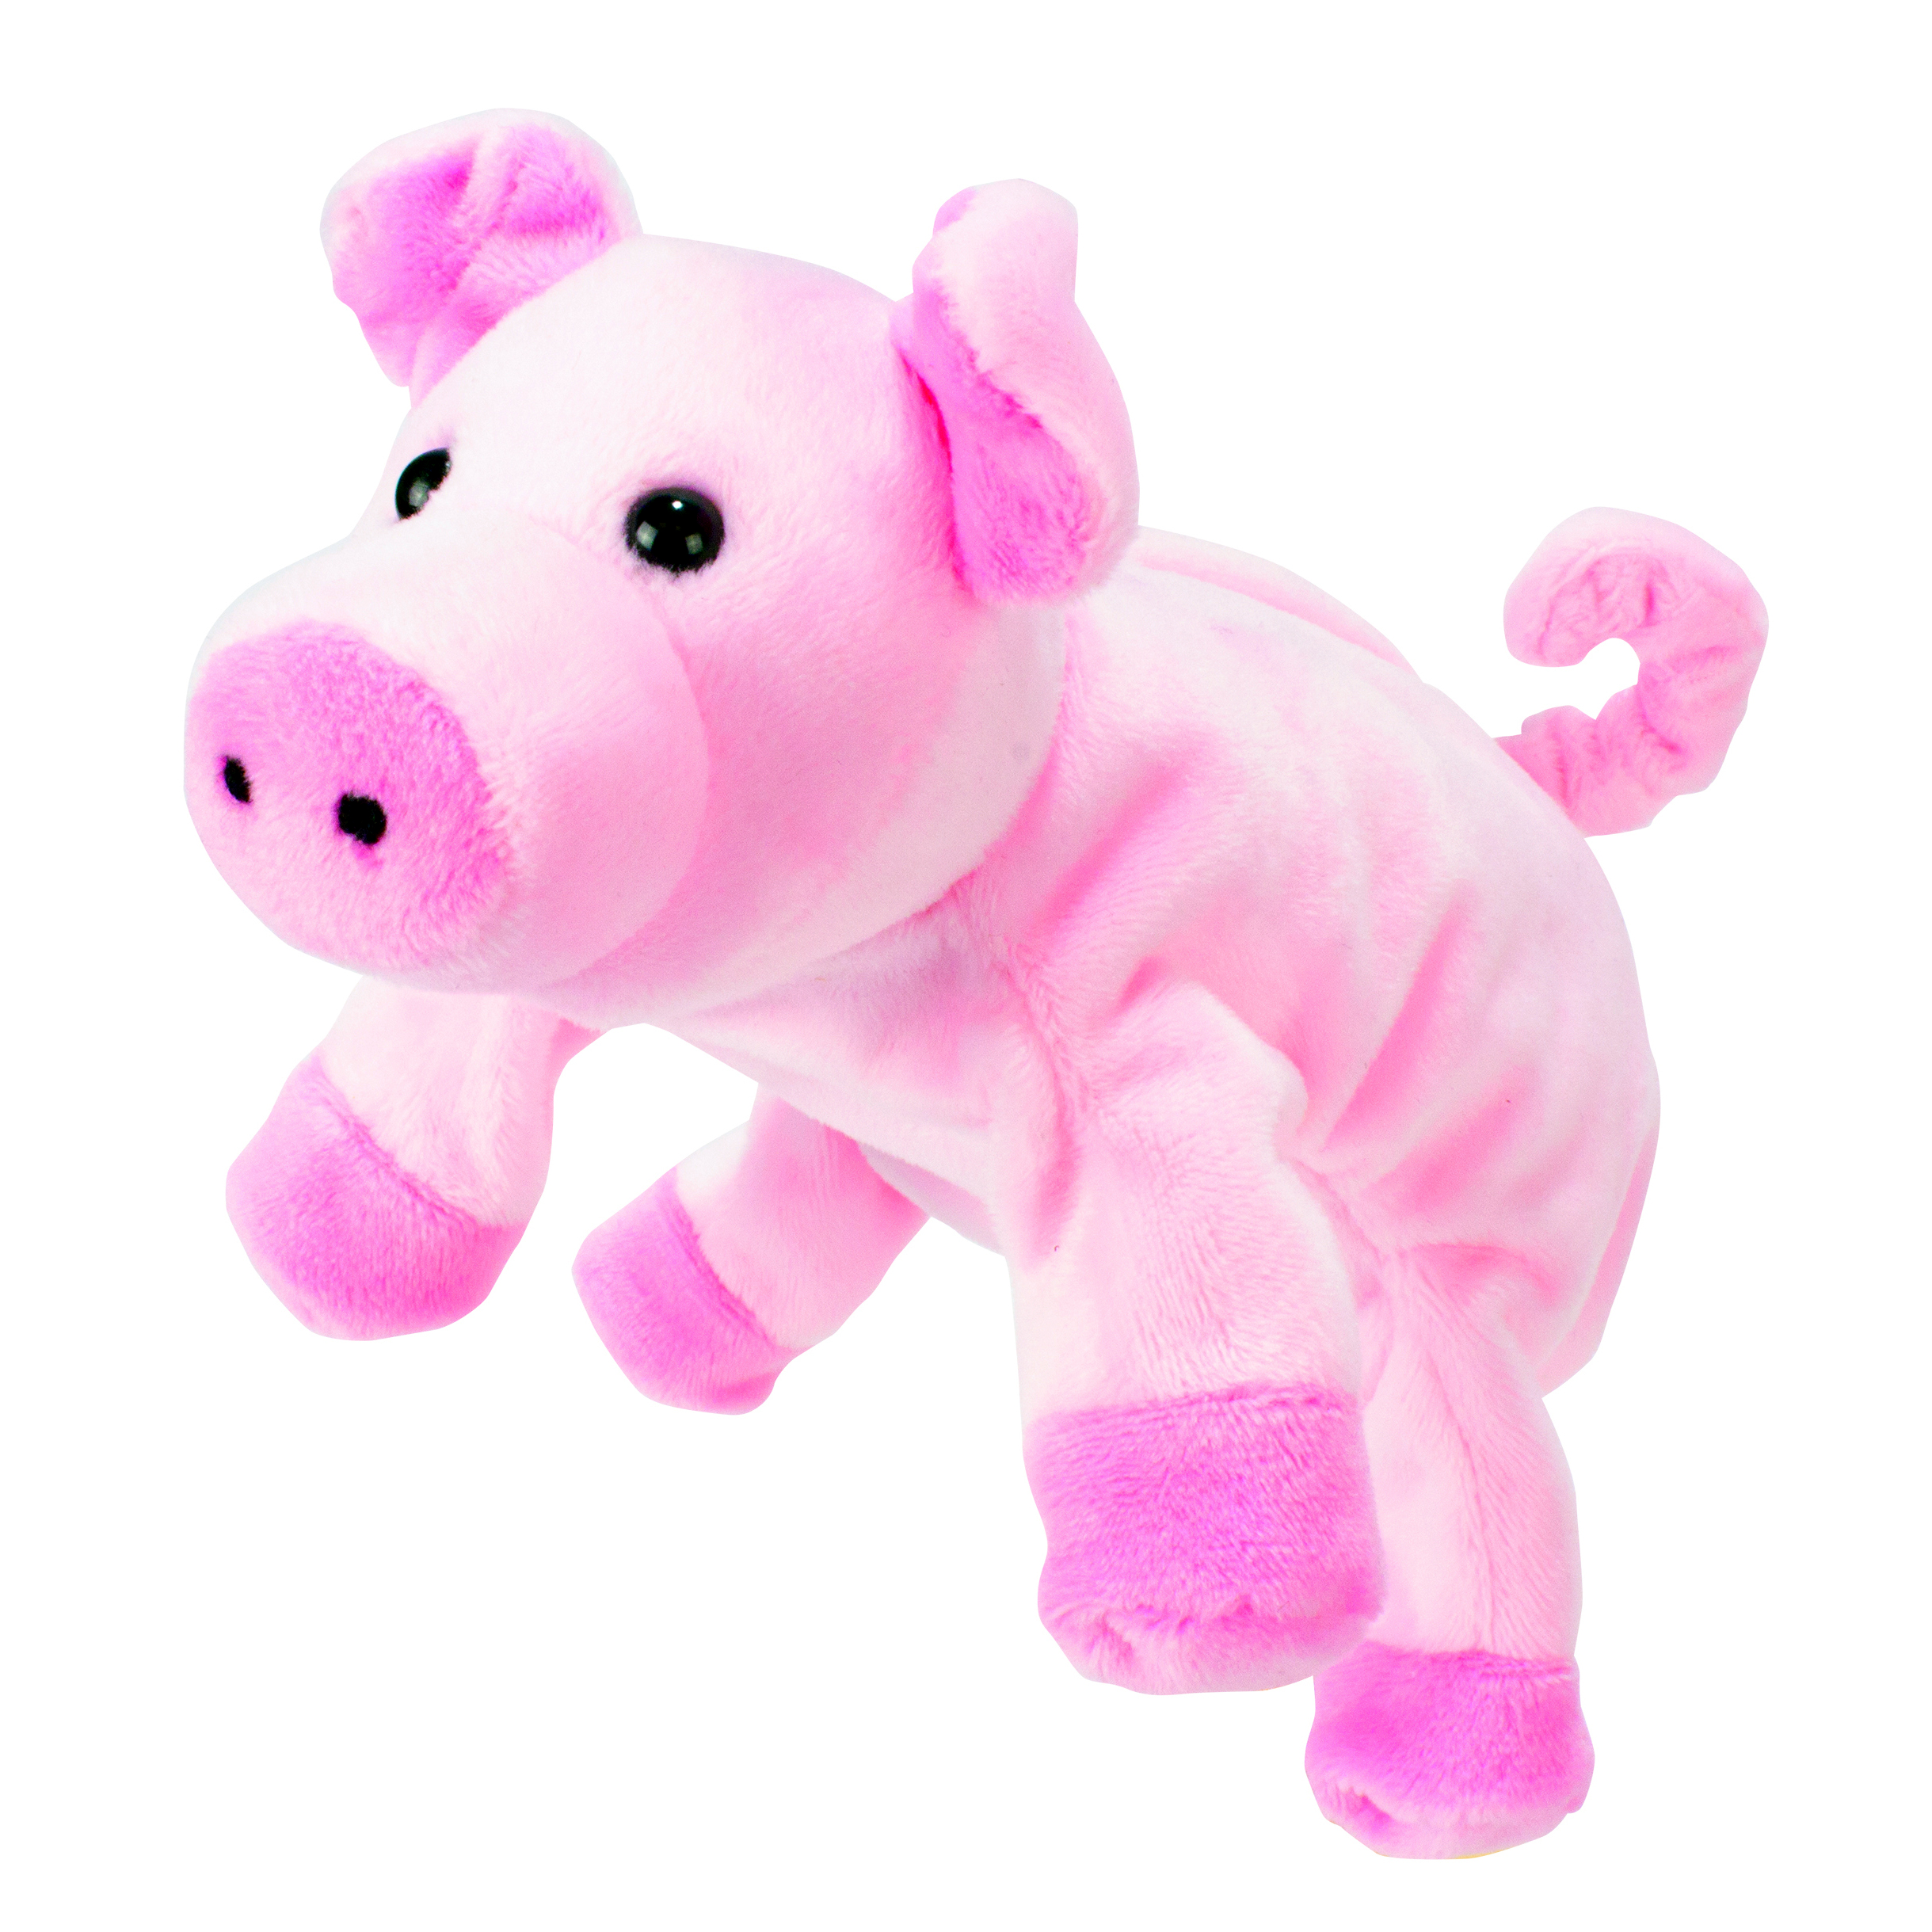 Hand puppet pig - by Beleduc